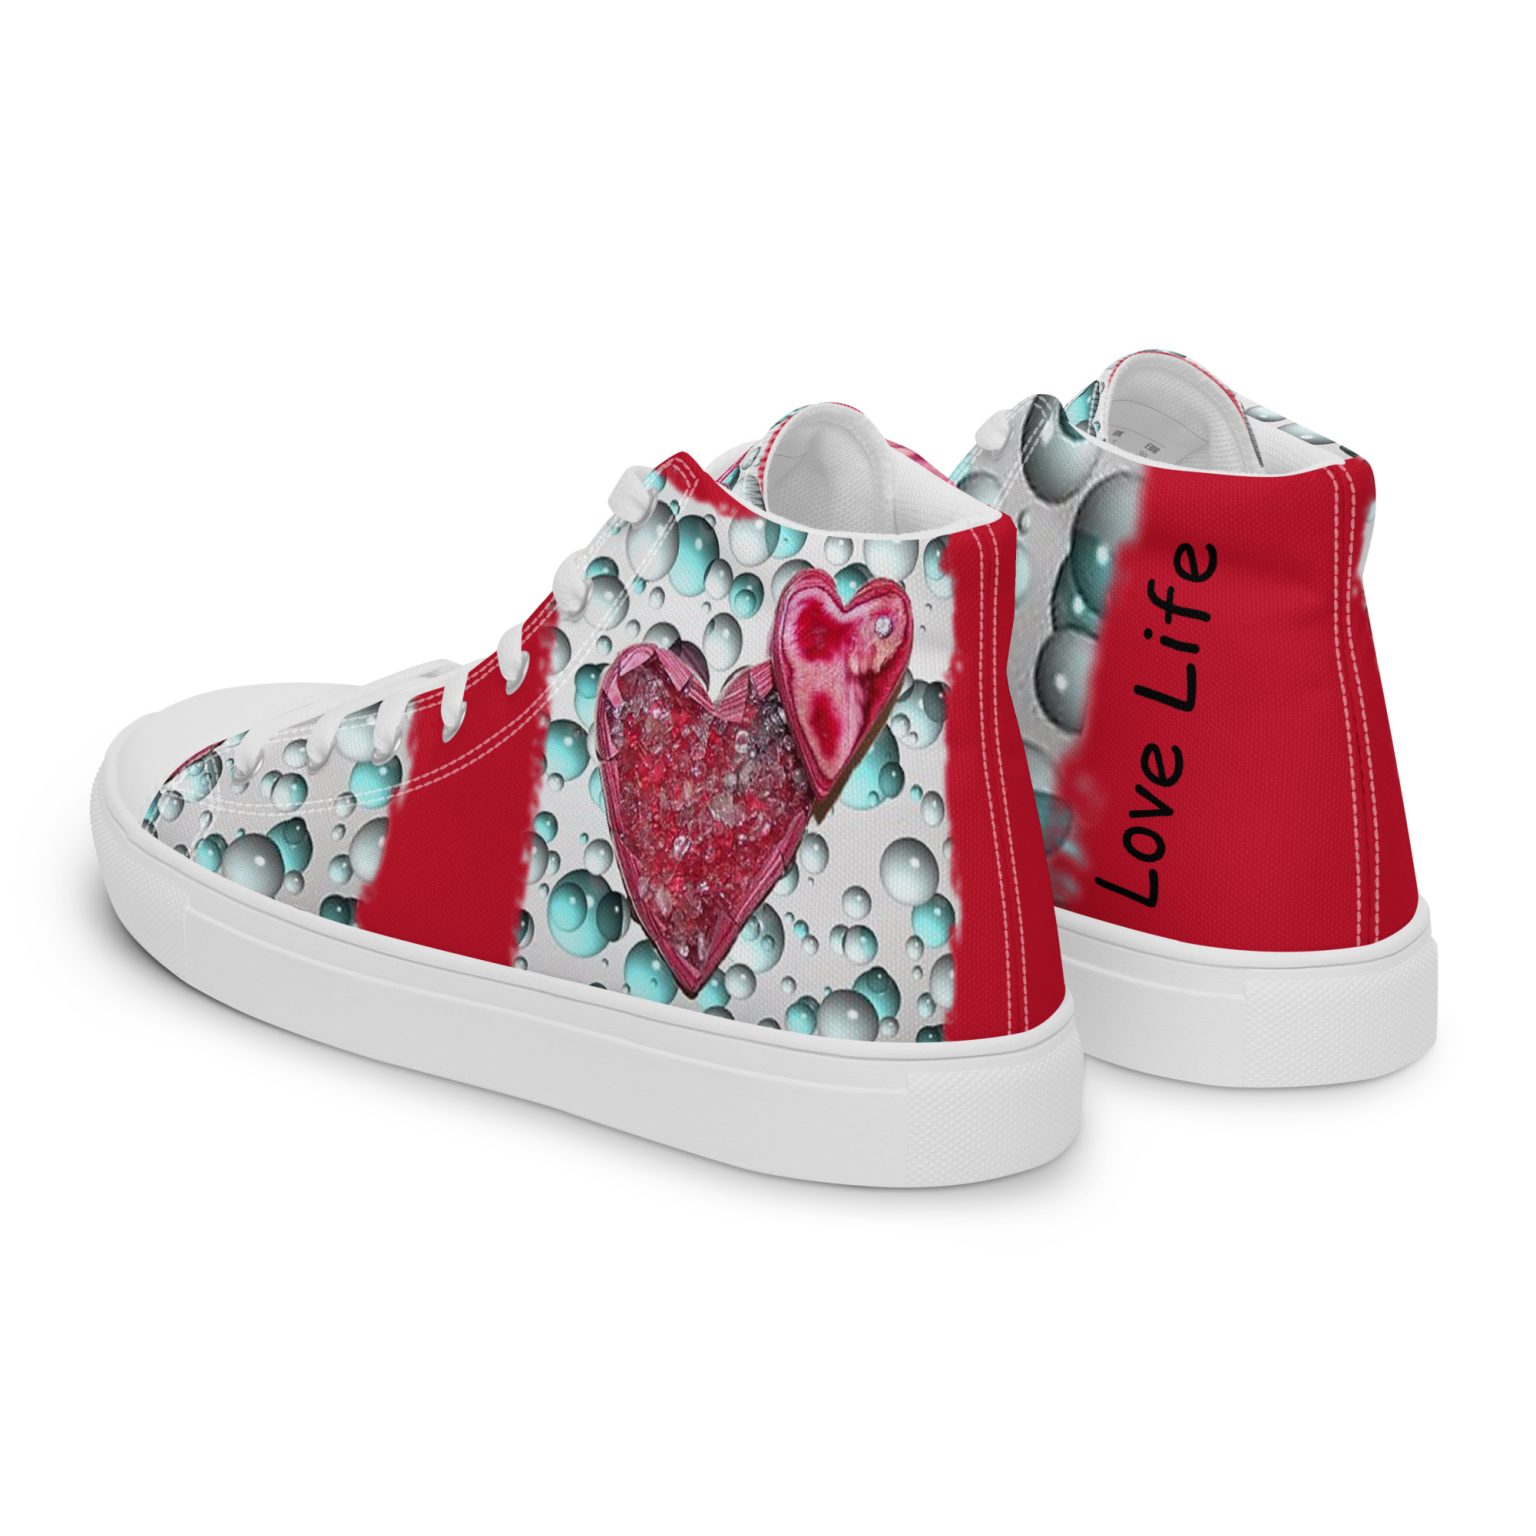 Two Red Hearts with Bubbles art Love Life Shoes always be Pro-Life I Love Life Shoes